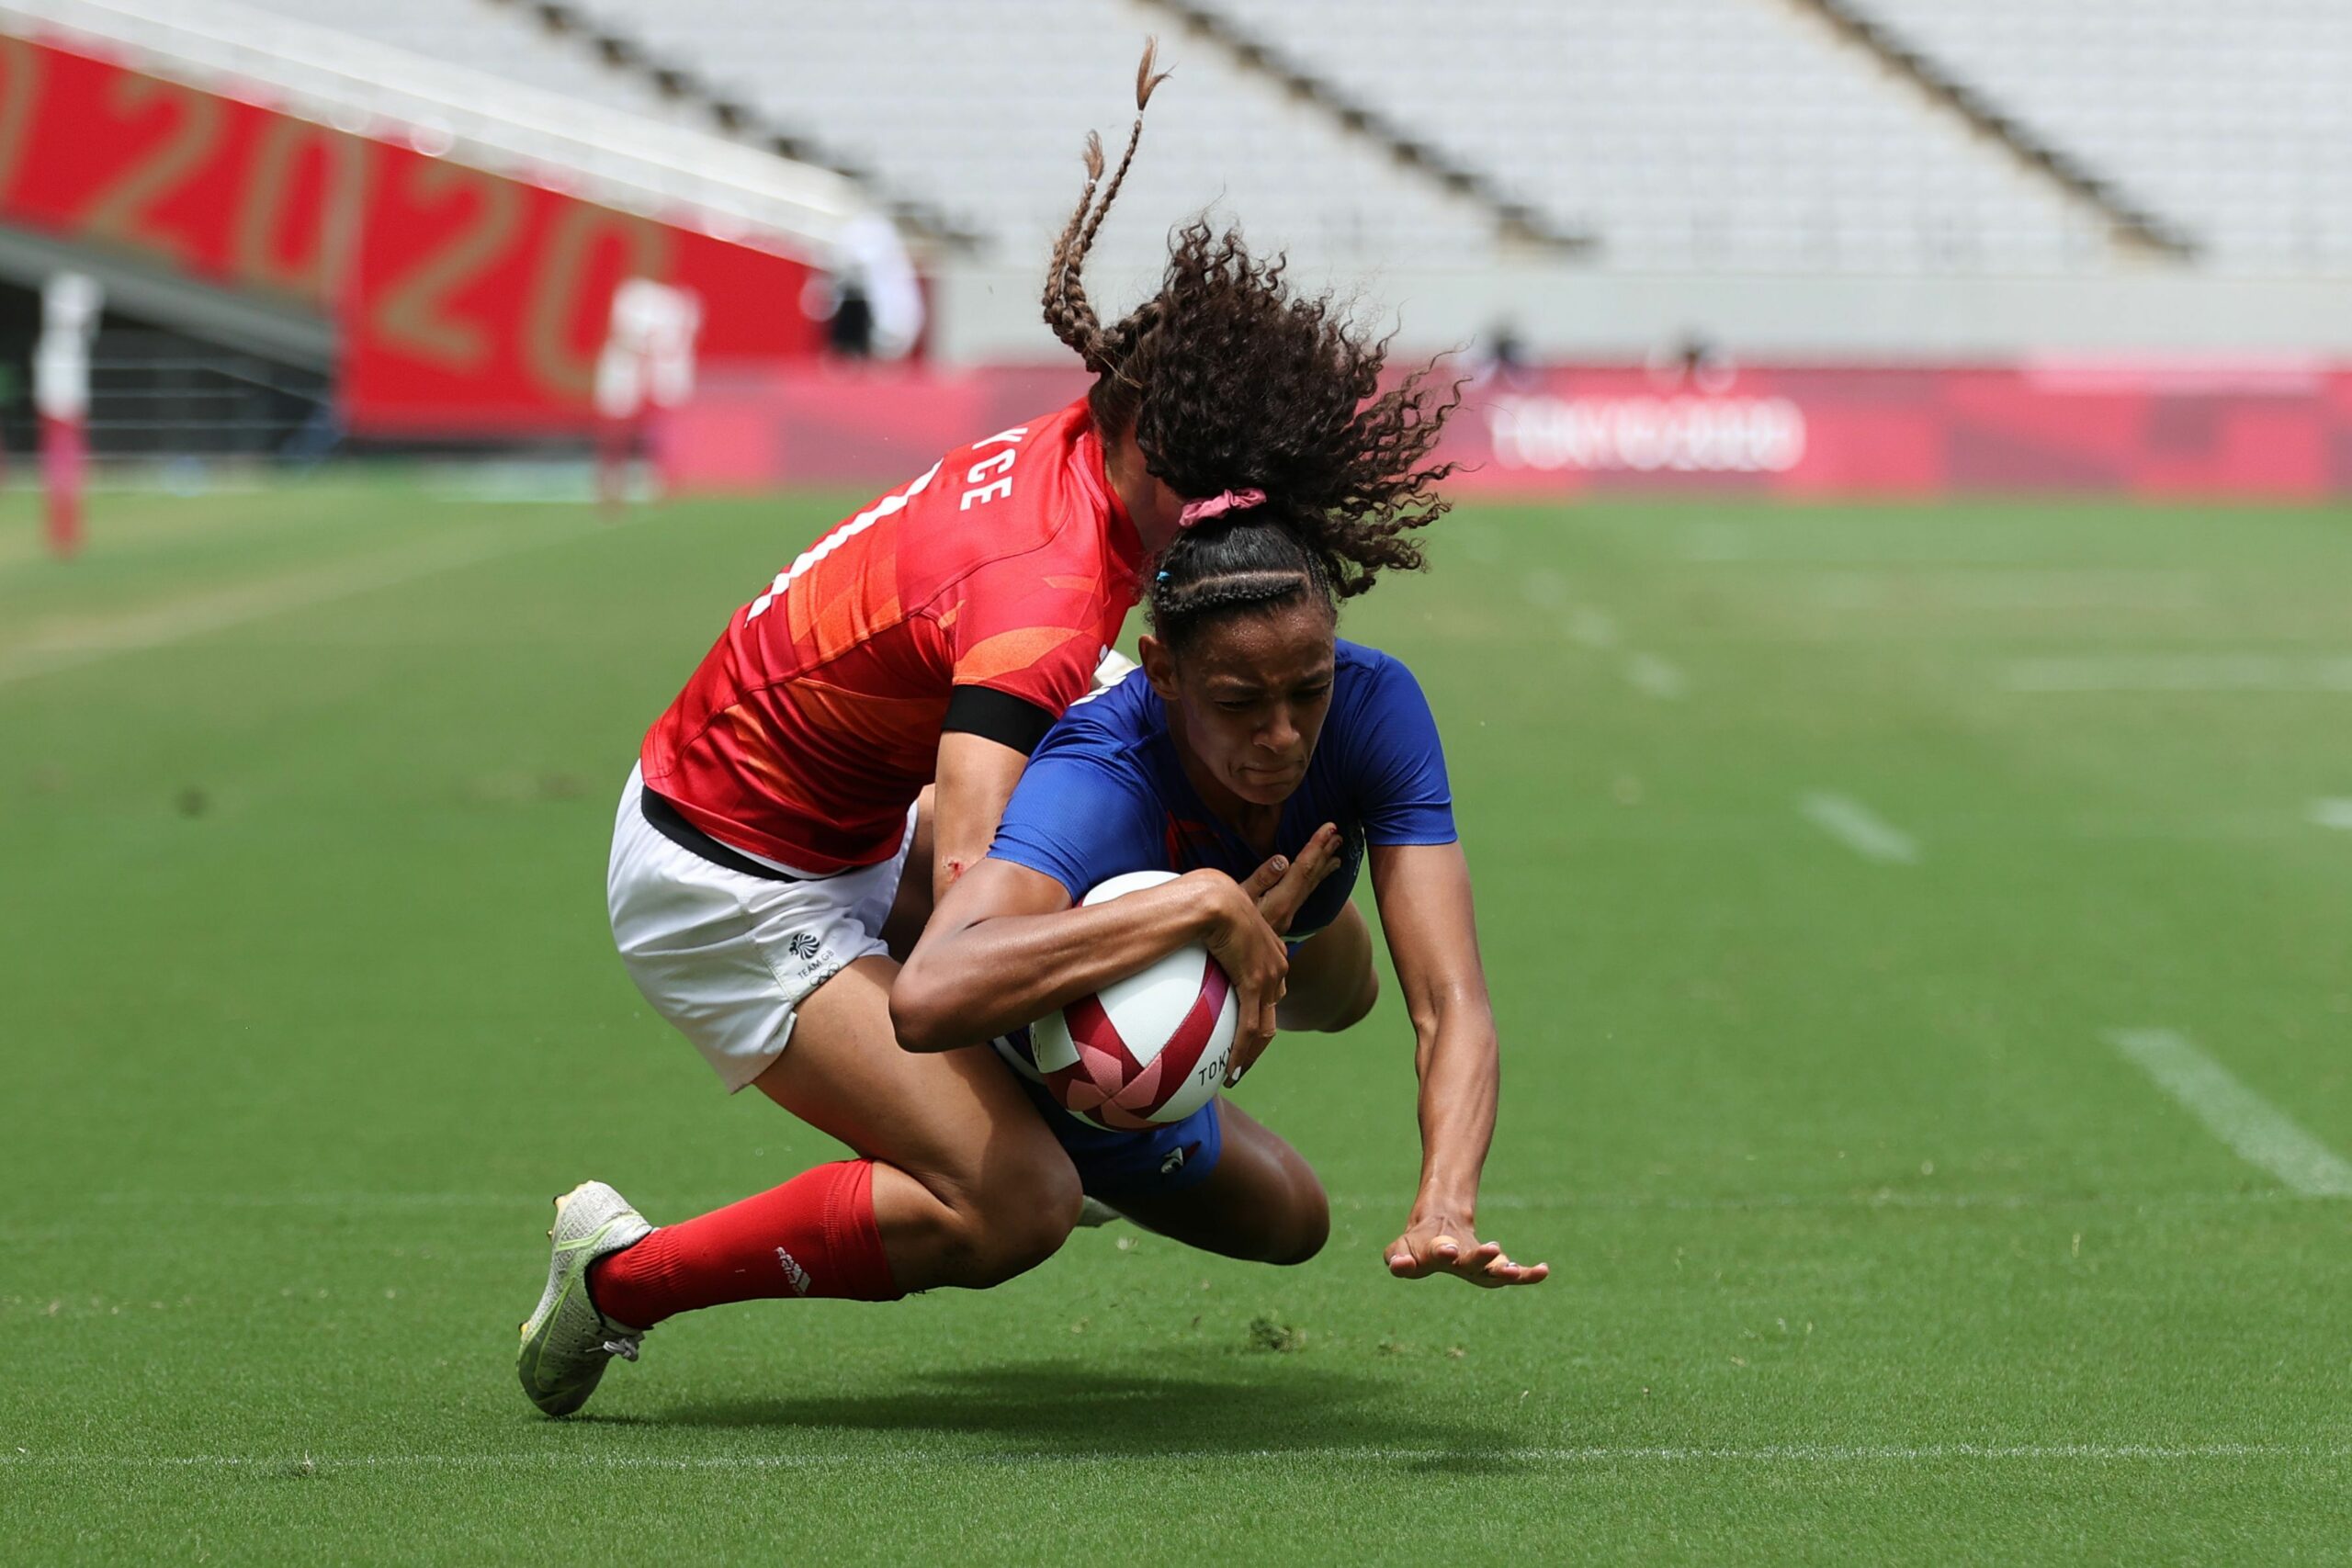 France's anne-cecile ciofani dives in for a try against team gb in the medal semi-final on day three of the tokyo 2020 olympic games